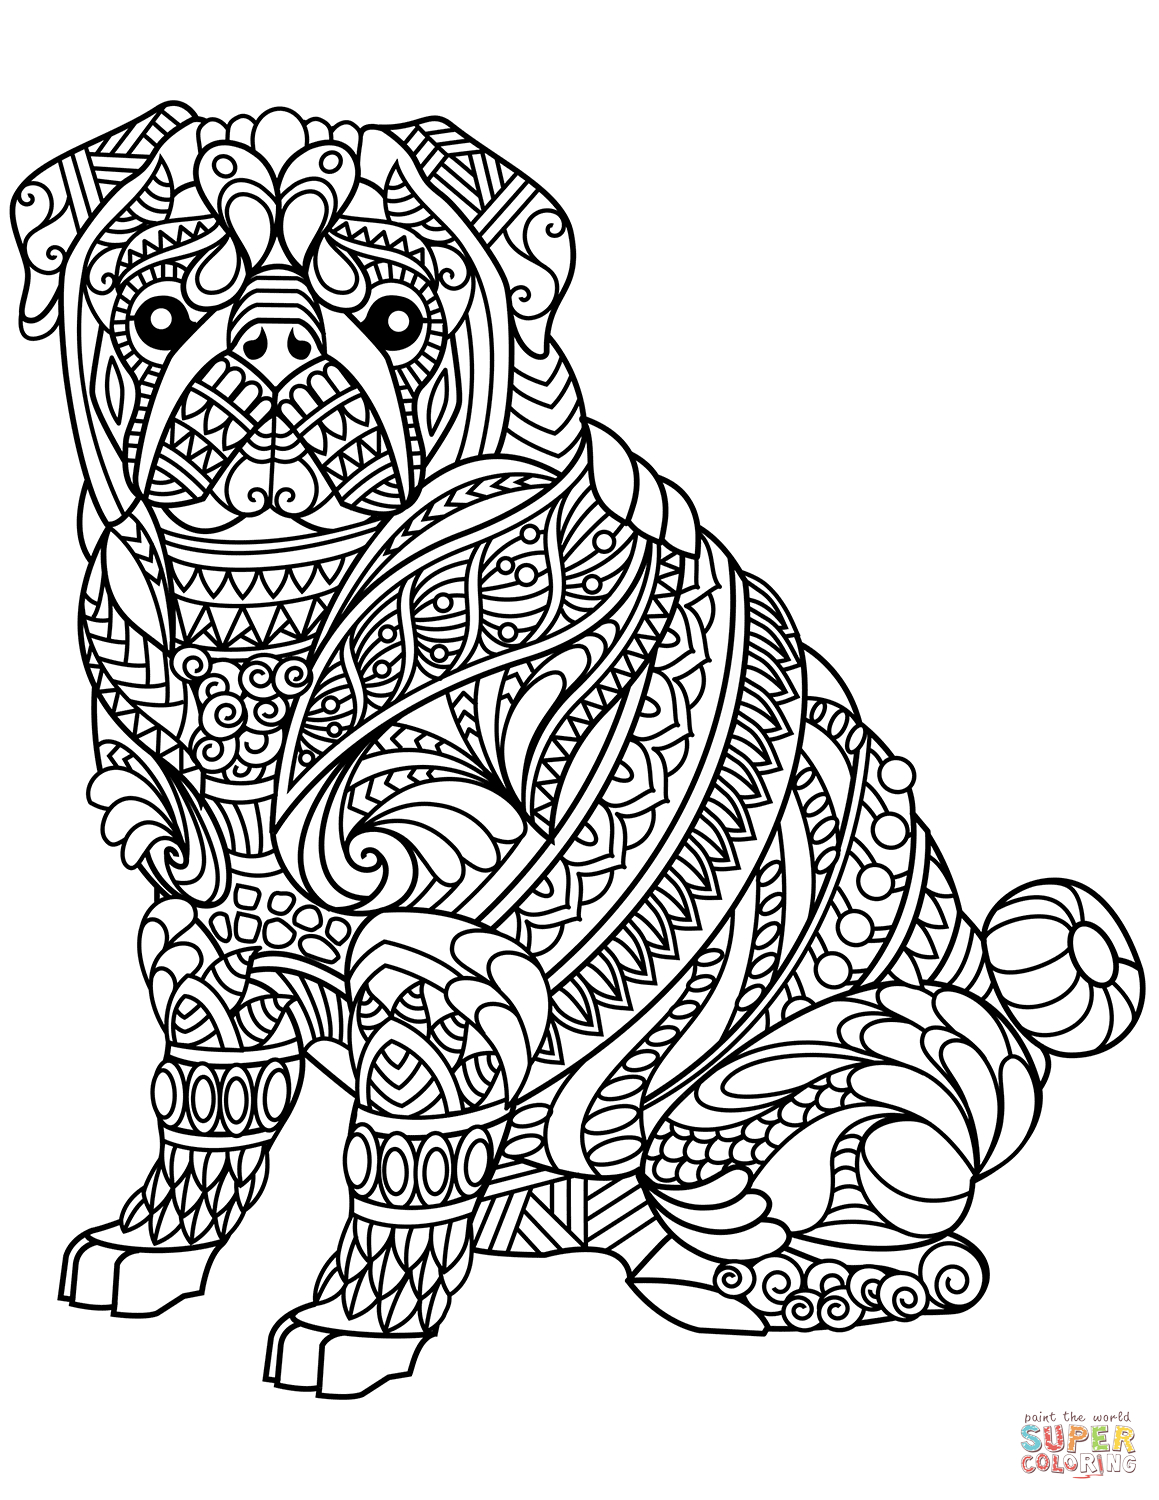 Coloring Pages Zen Zentangle Coloring Pages Free Coloring Pages